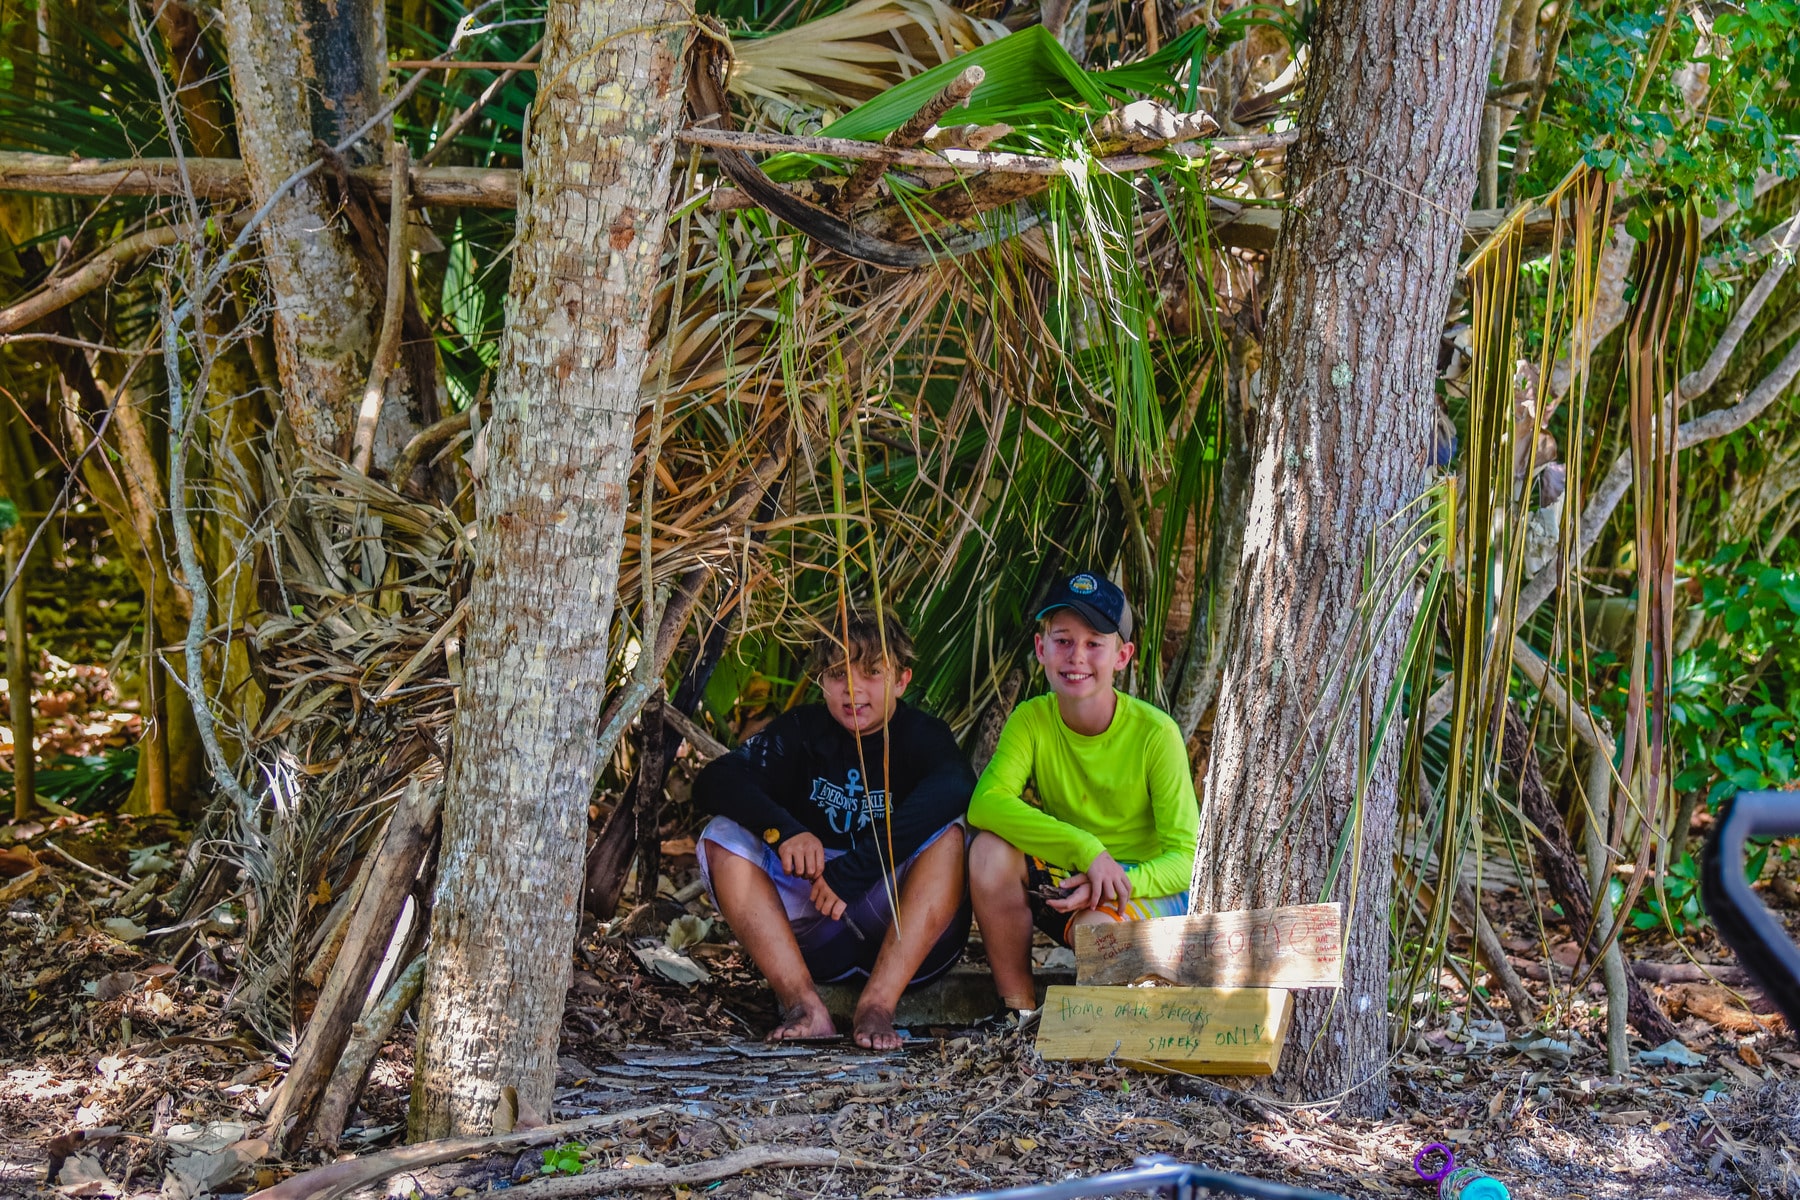 Sanibel Sea School campers in shelter built with palm fronds